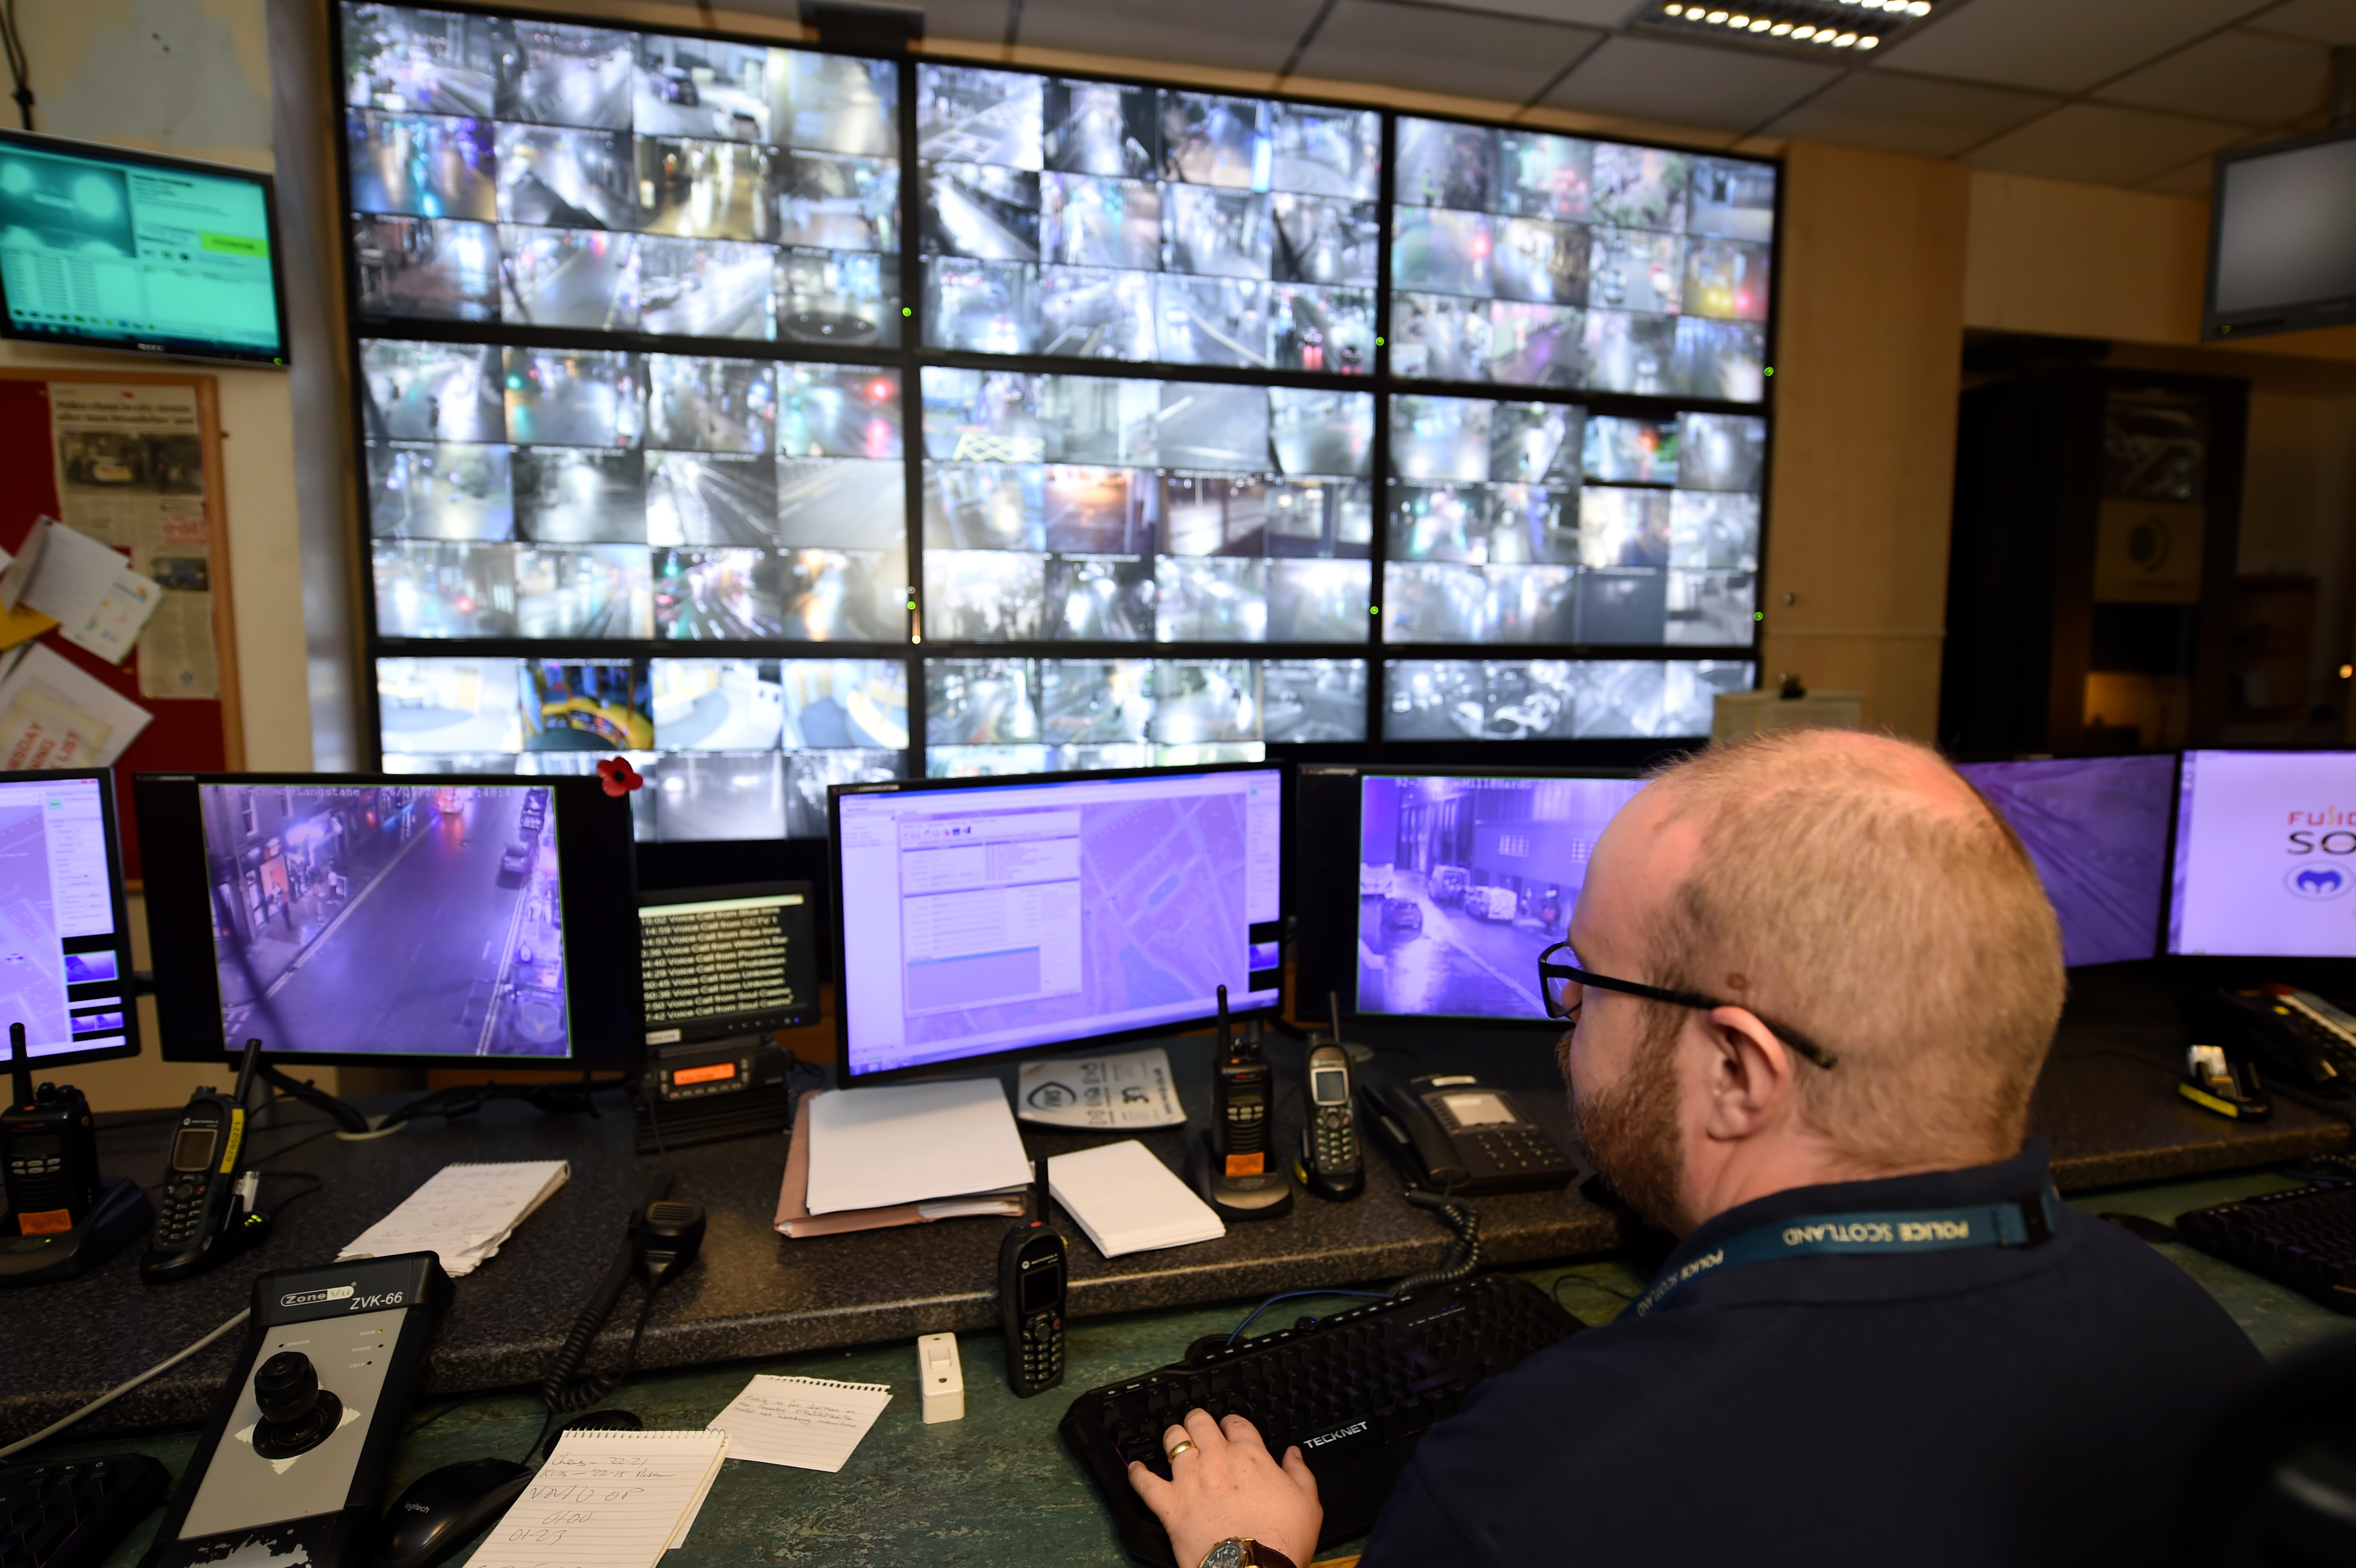 The police's CCTV control room in Aberdeen